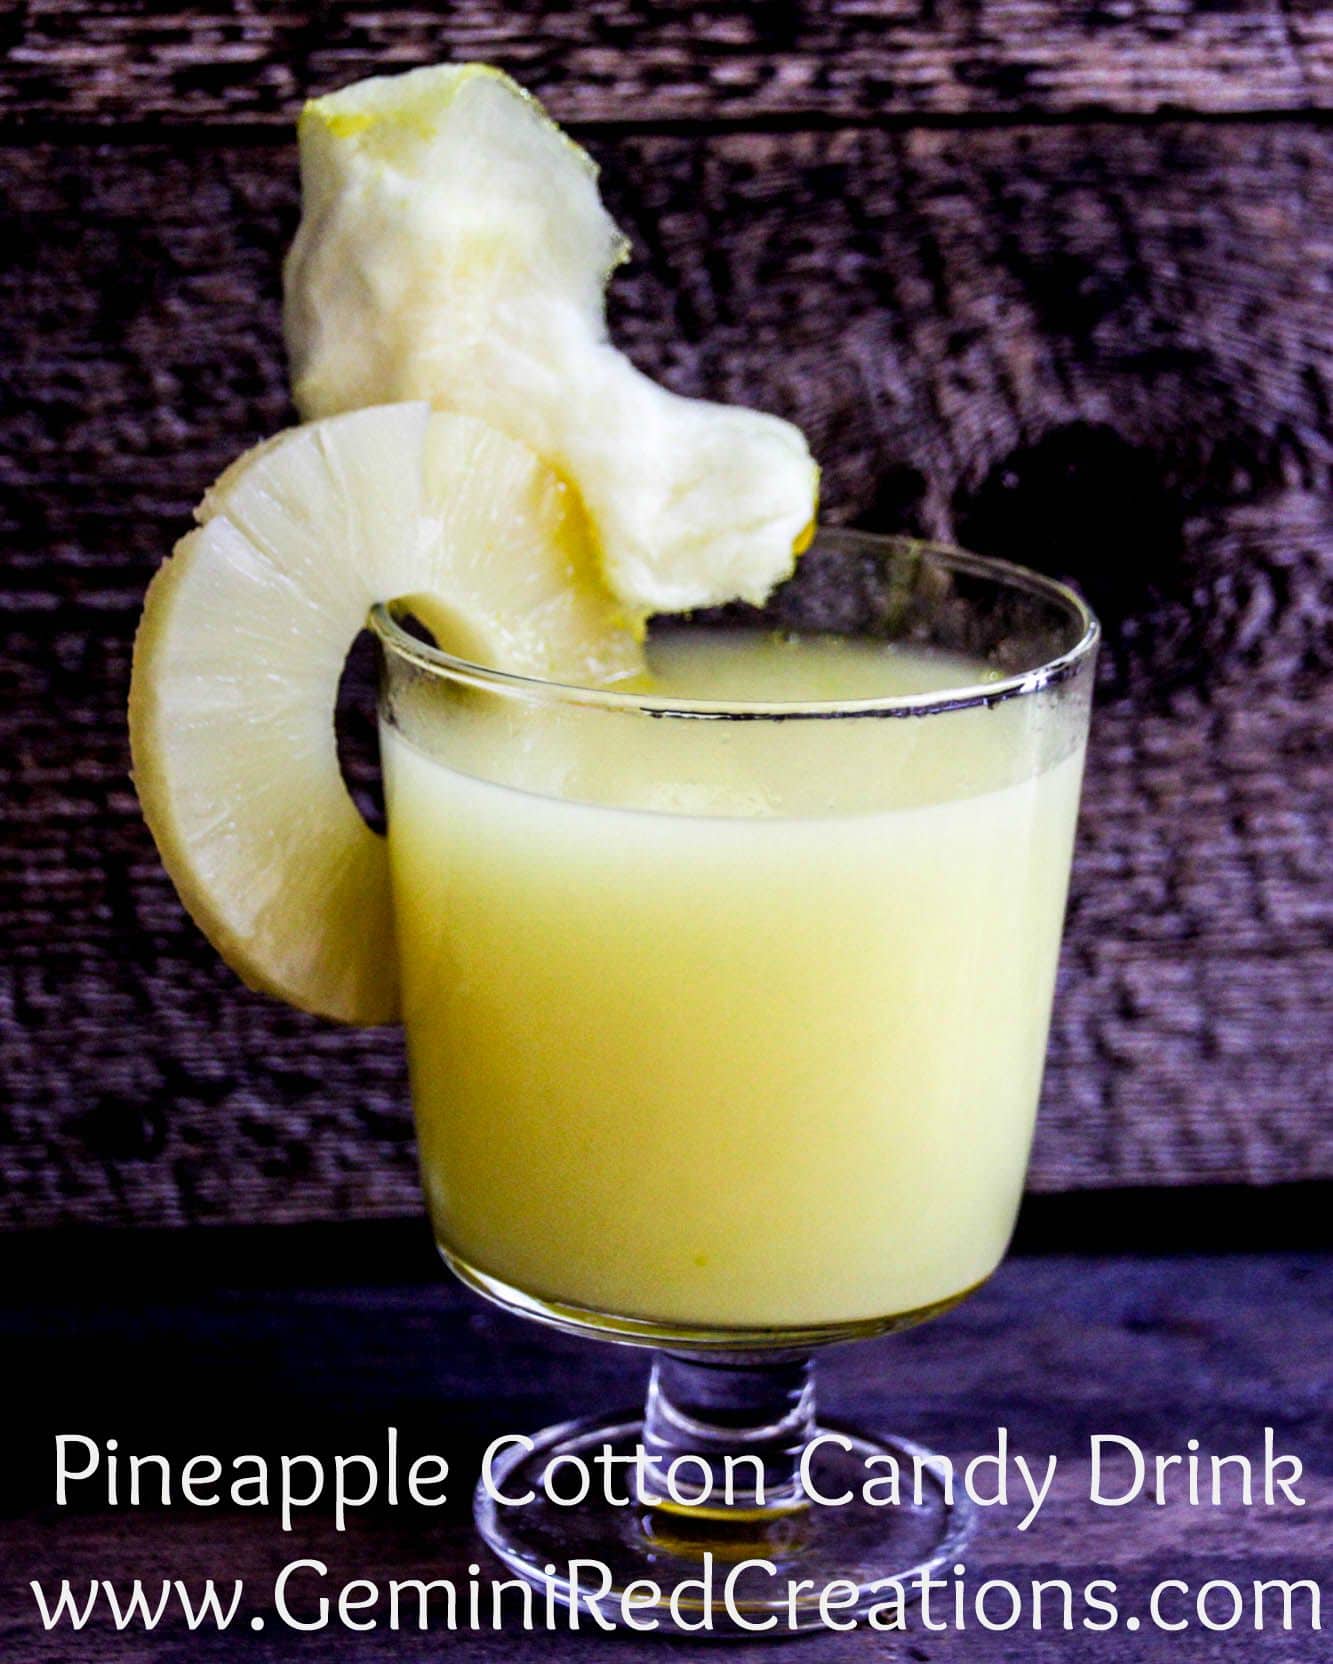 Pineapple cotton candy drink